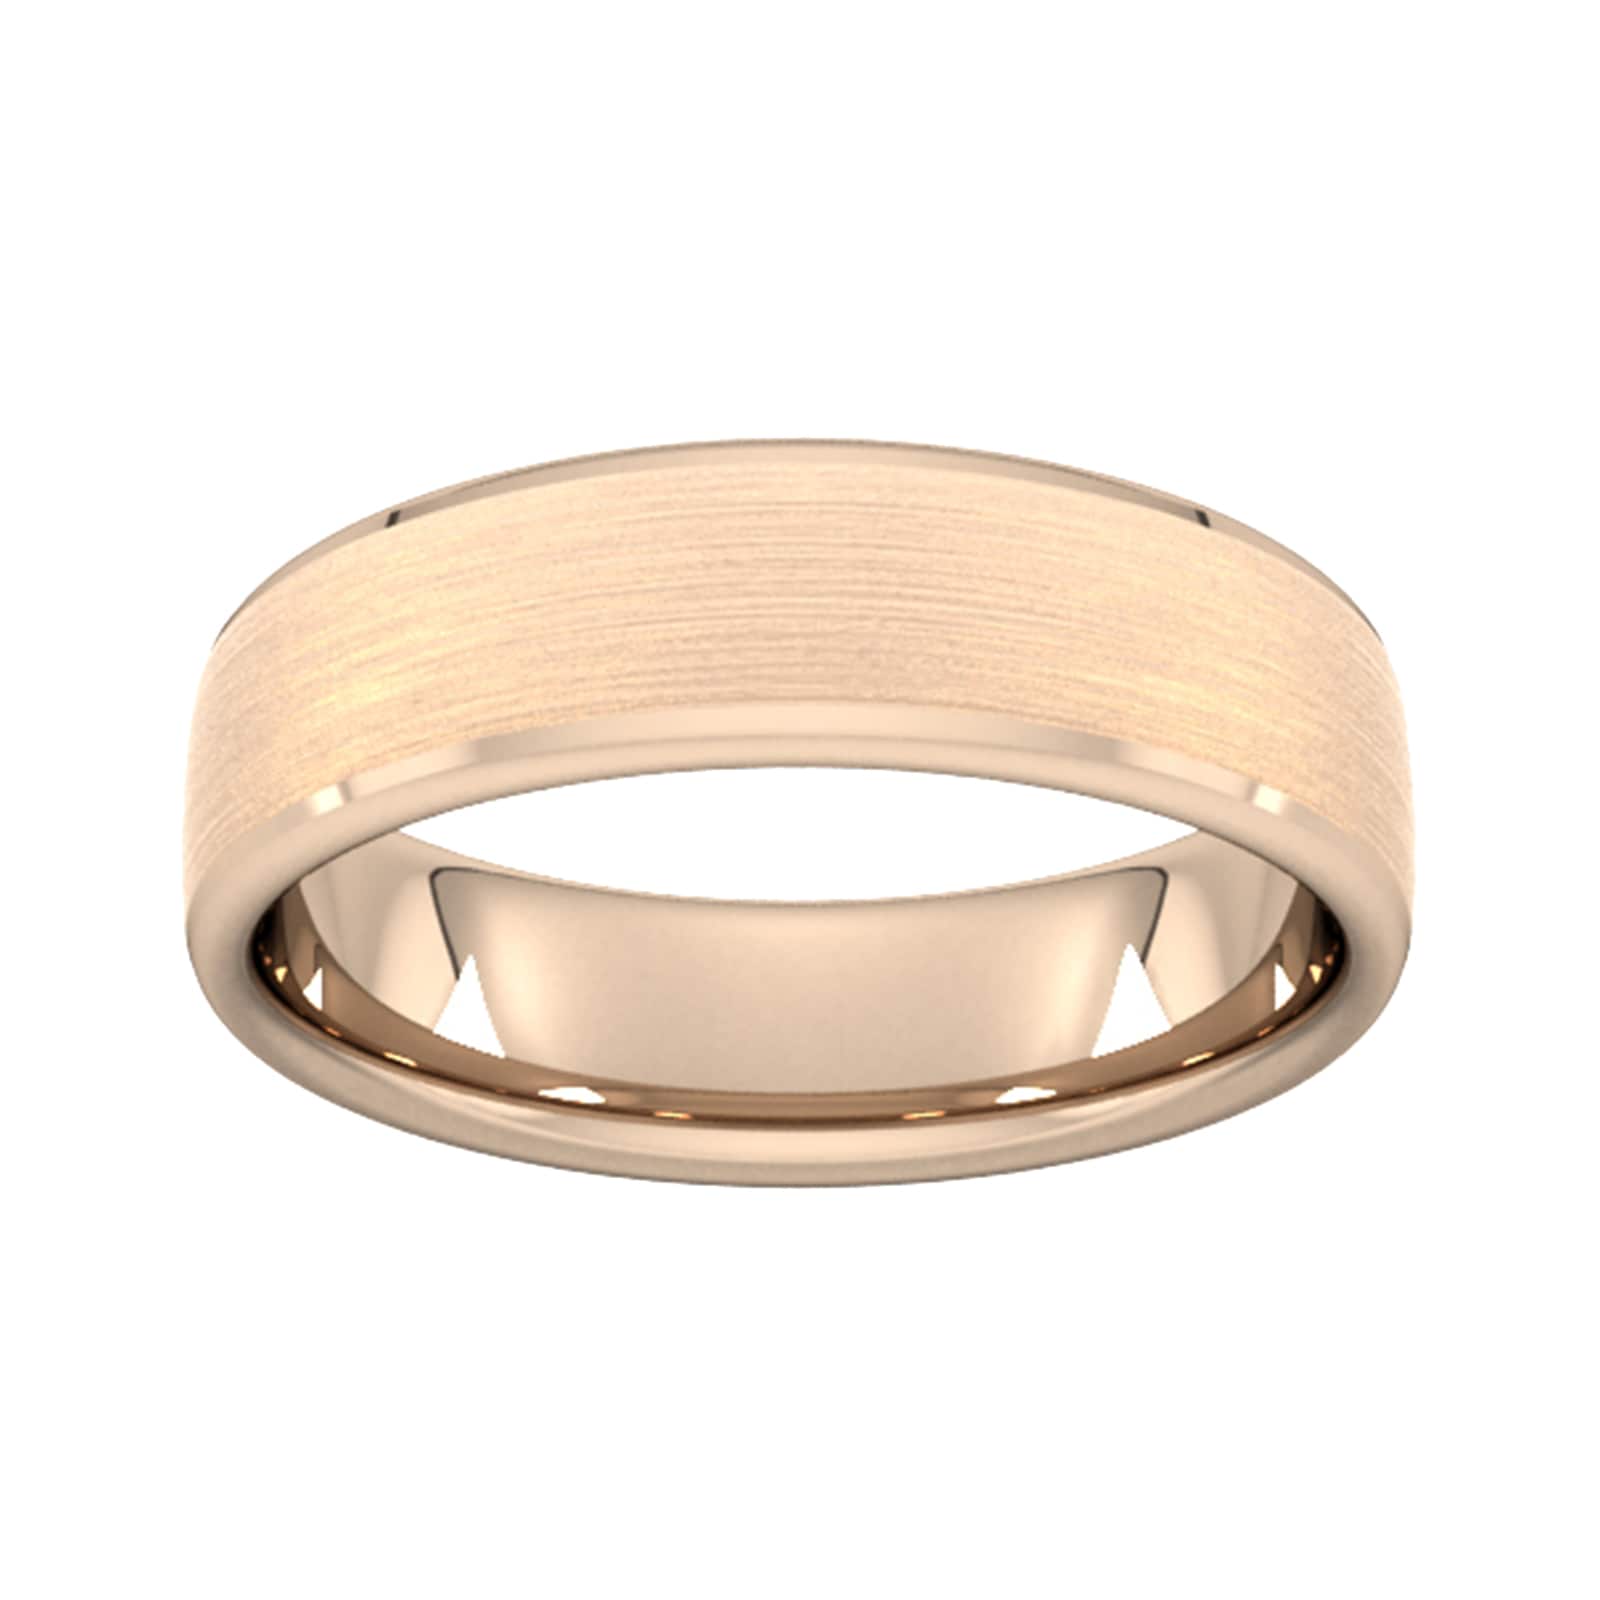 6mm Traditional Court Standard Polished Chamfered Edges With Matt Centre Wedding Ring In 18 Carat Rose Gold - Ring Size J